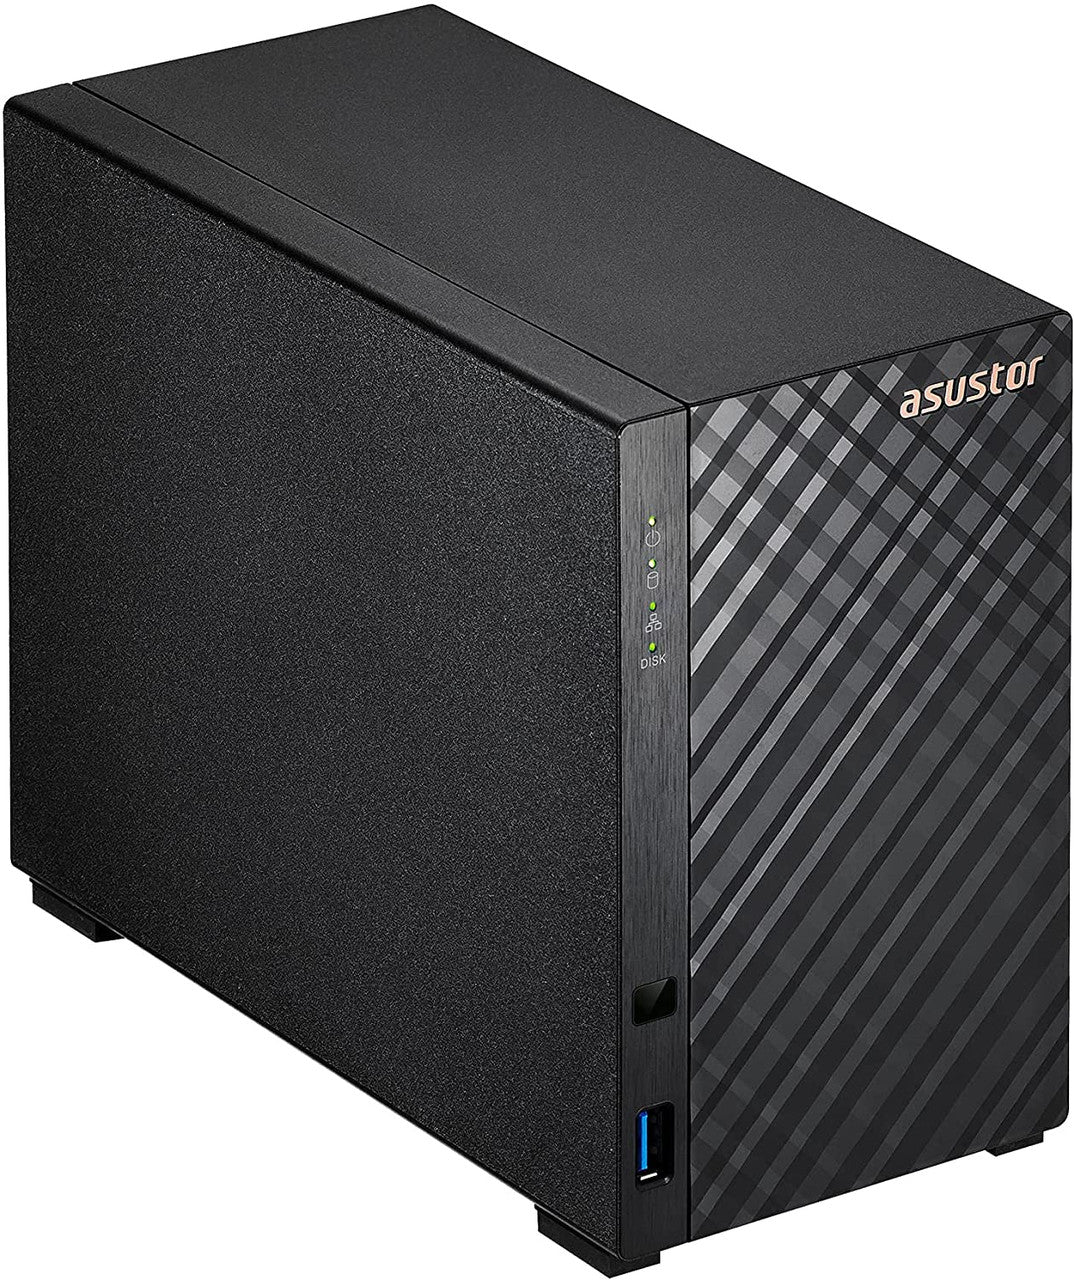 Asustor AS1102T 2-Bay Drivestor 2 NAS with 1GB RAM and 20TB (2x10TB) Western Digital RED PRO Drives